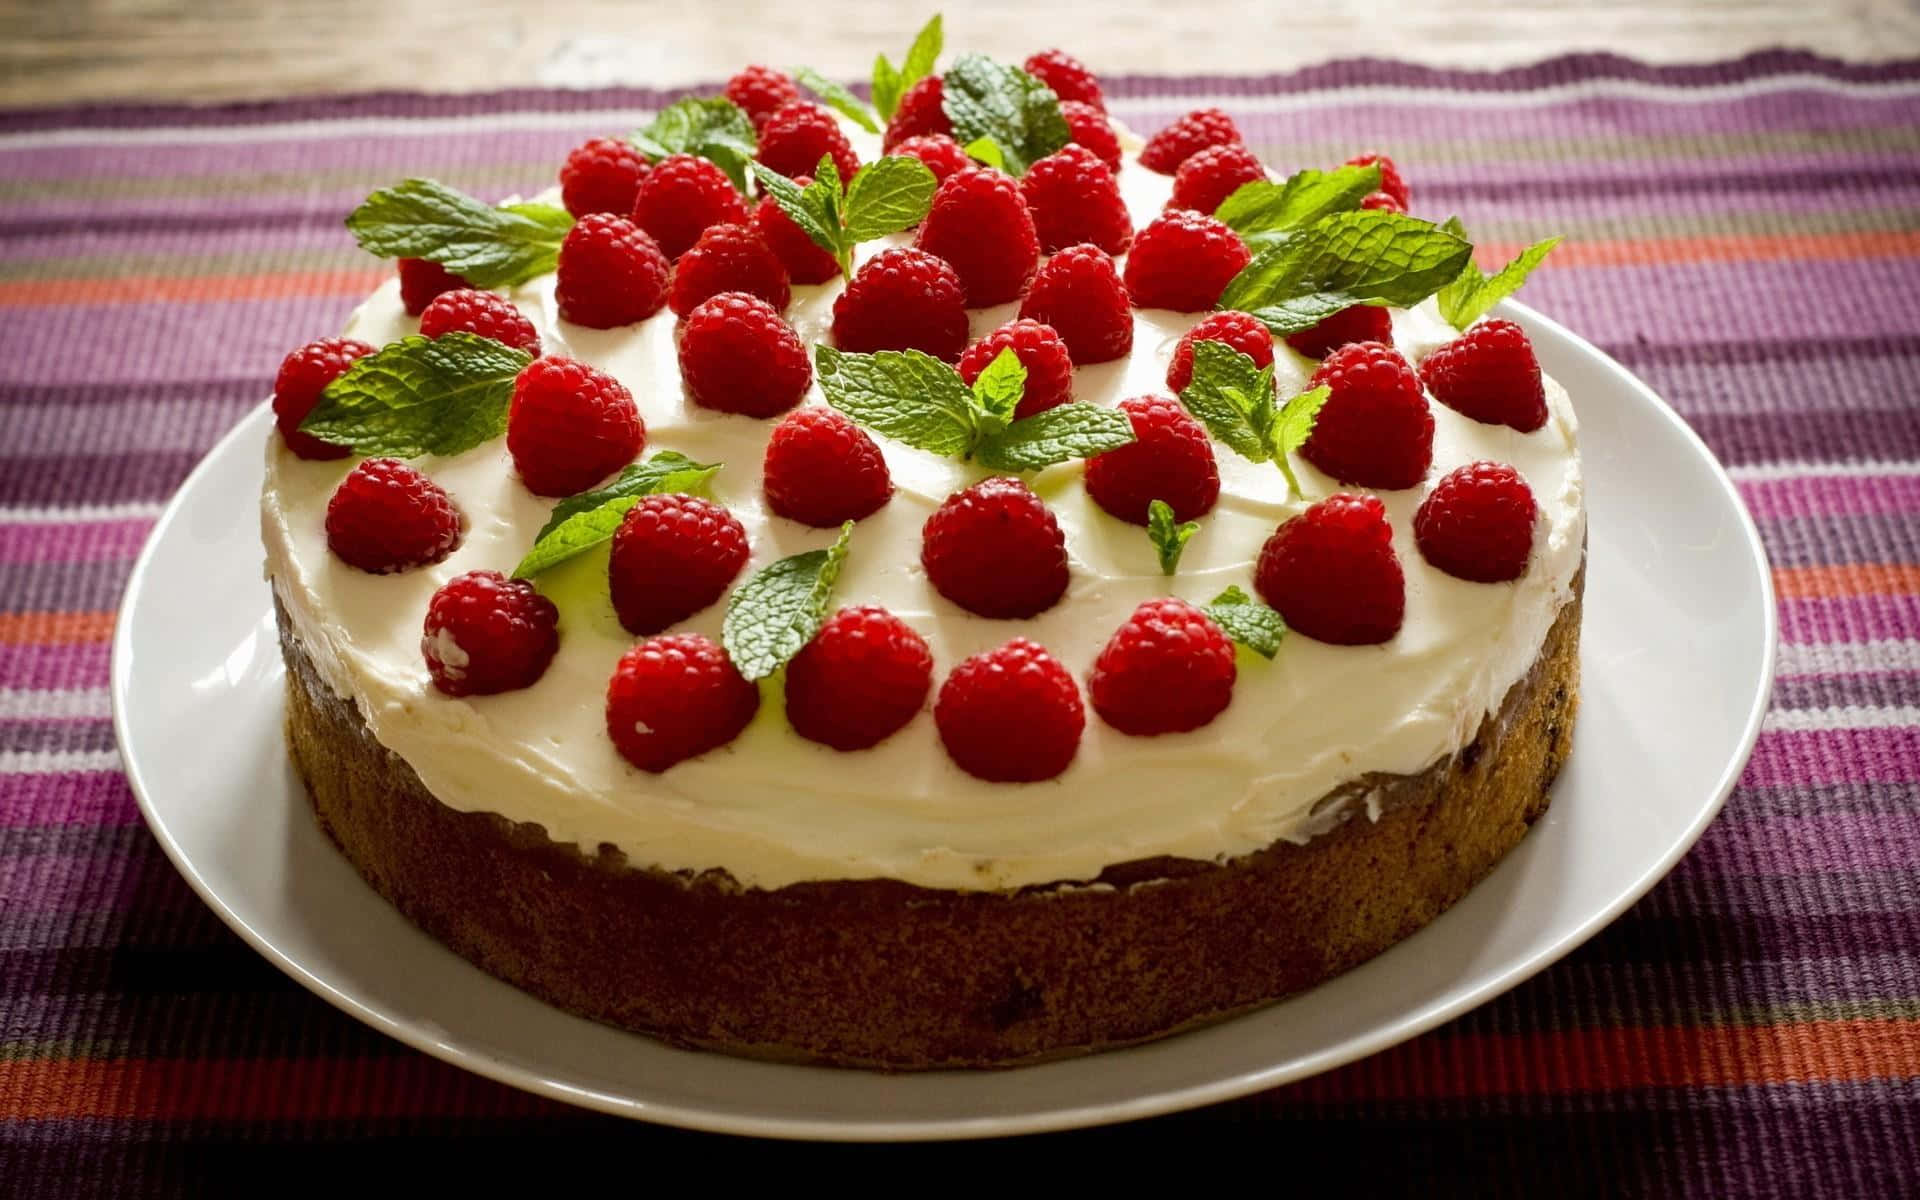 Deliciously vibrant cake that will satisfy any sweet tooth